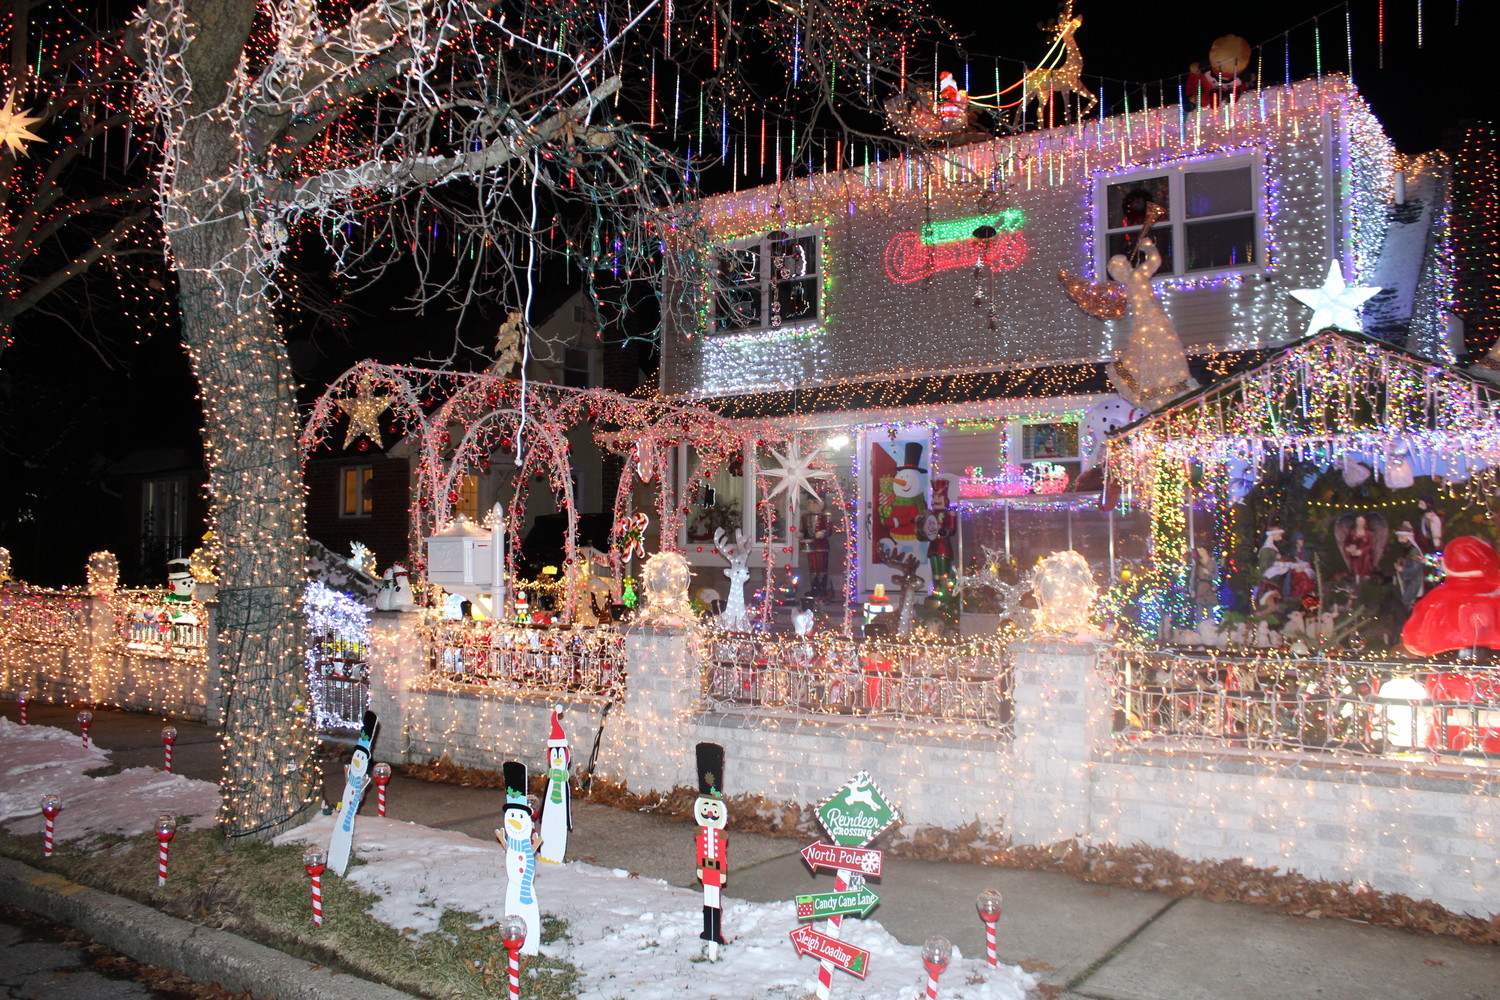 The house at 144 Guenther Ave. in Valley Stream leaves no conceivable Christmas decoration unaccounted for.